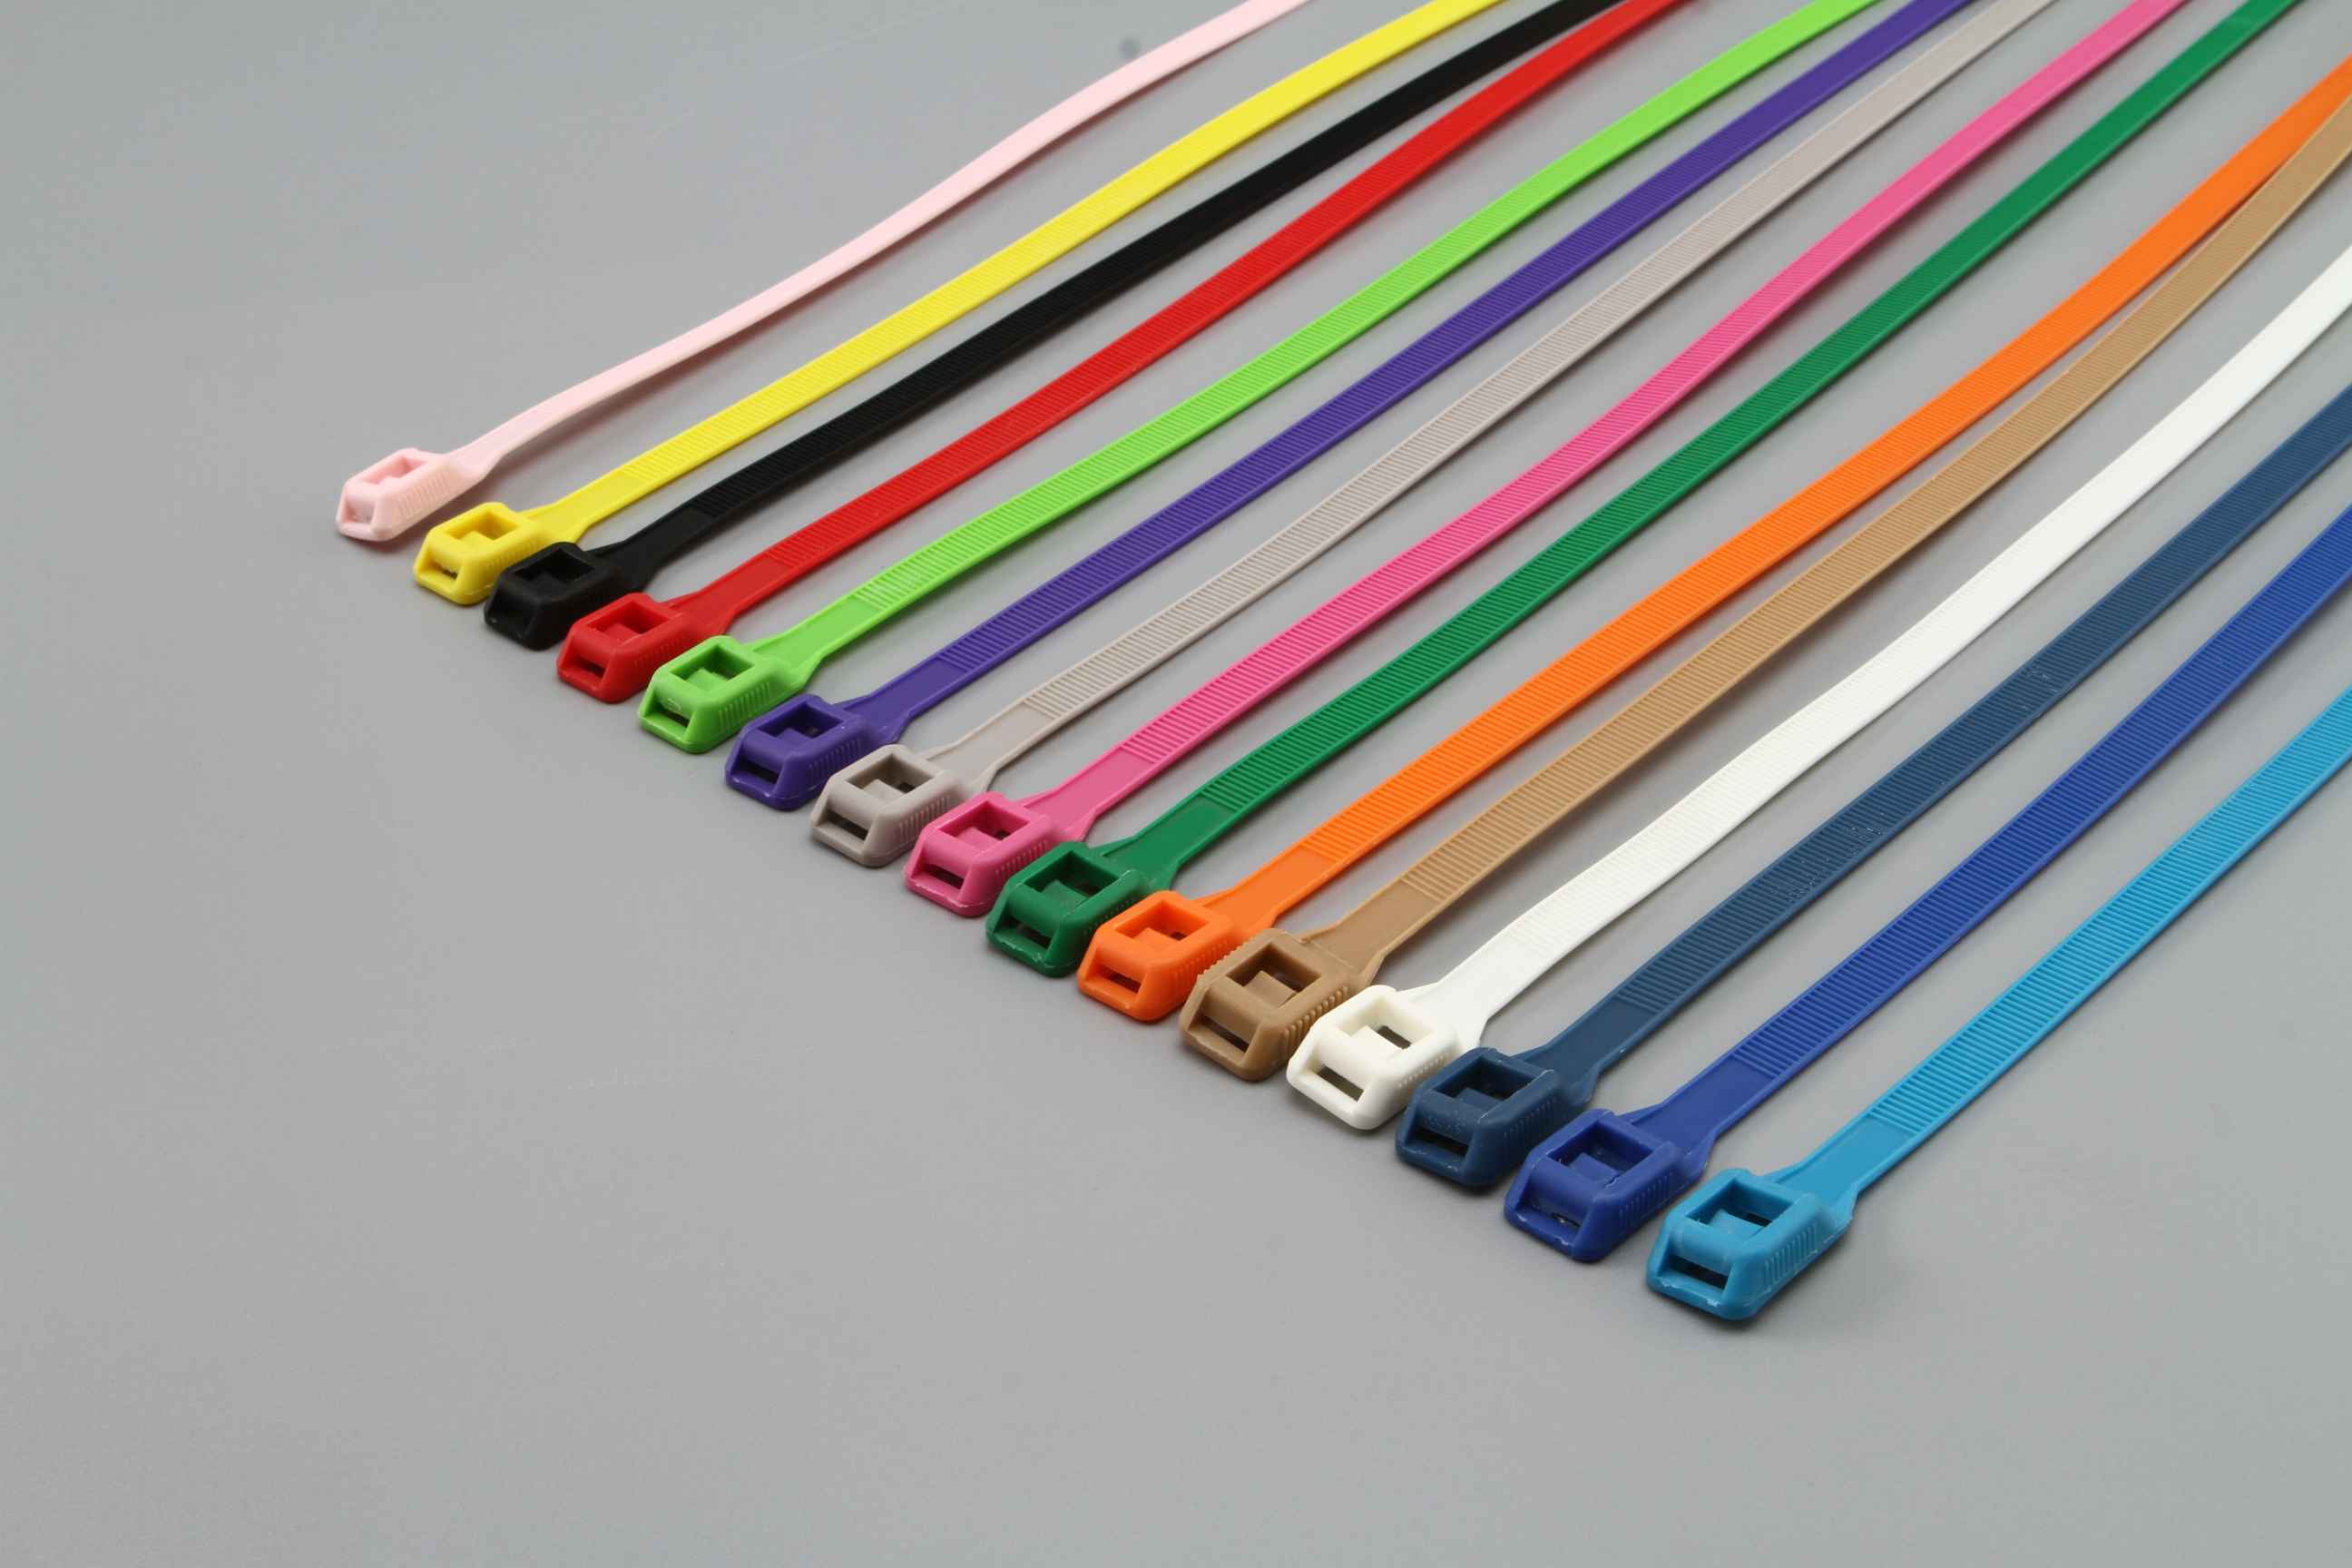 Fishbone cable ties - 1 